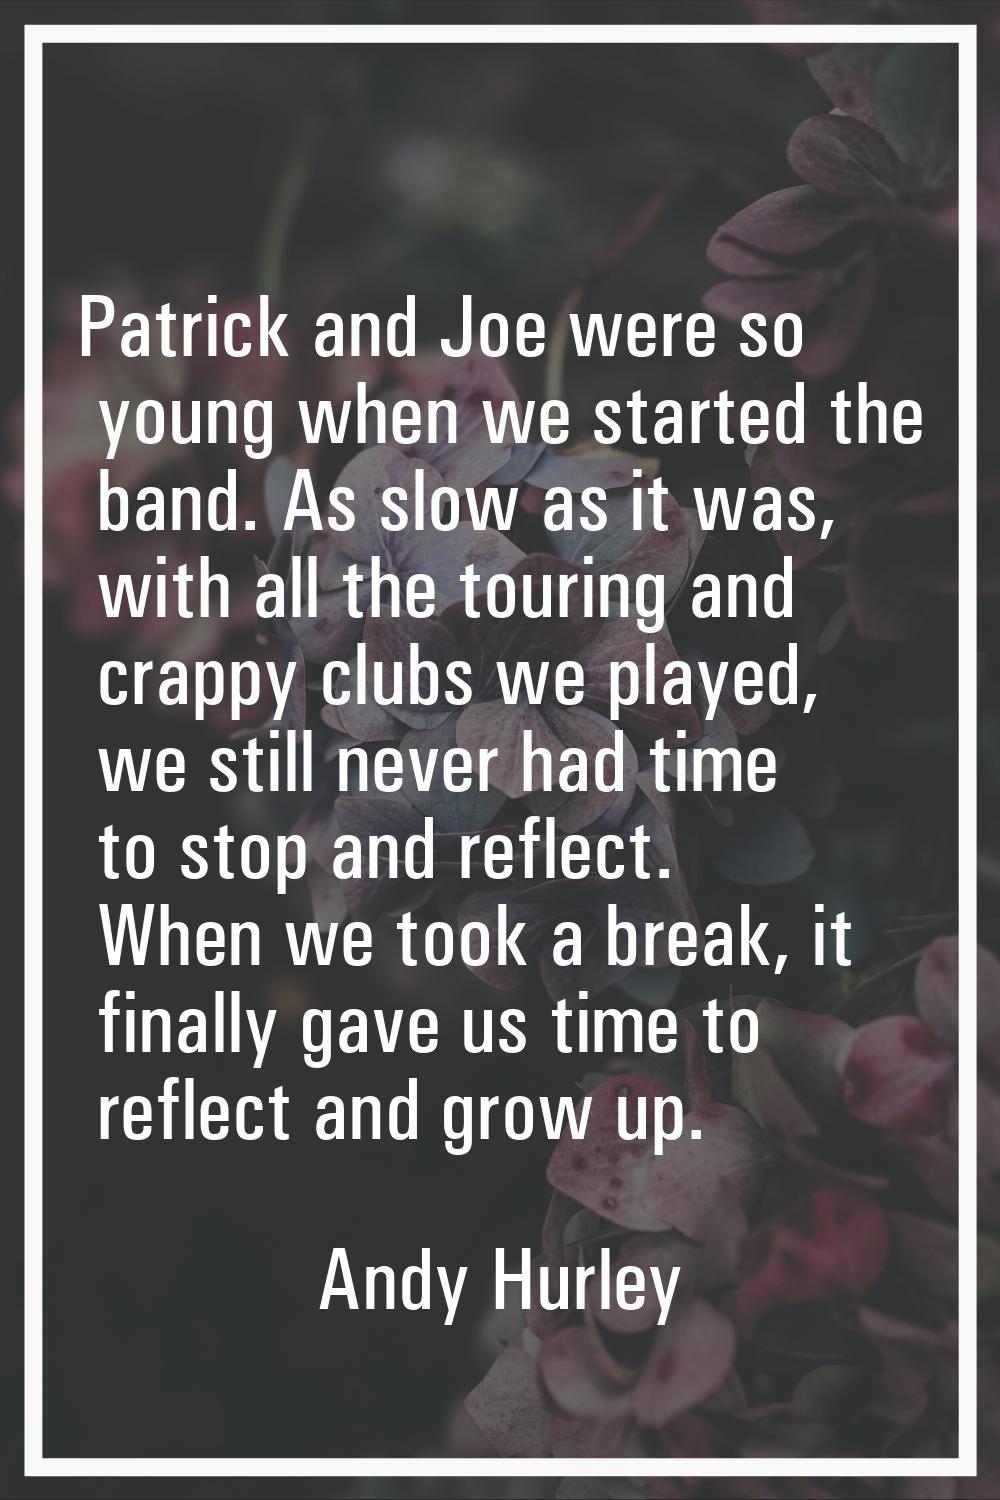 Patrick and Joe were so young when we started the band. As slow as it was, with all the touring and